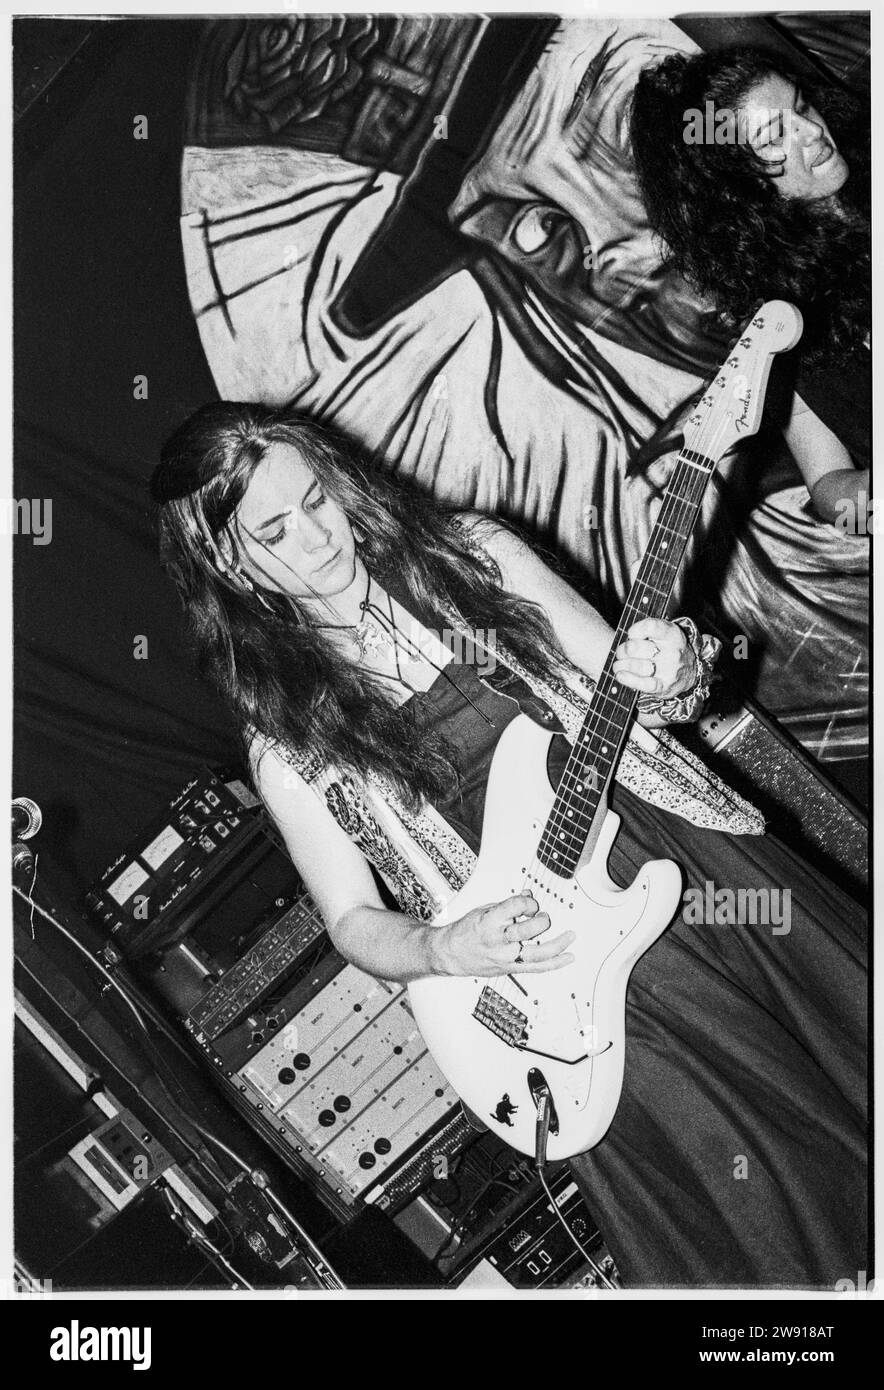 VOODOO QUEENS, BRISTOL FLEECE, 1993: Guitarist Ella Guru (born Ella Drauglis). The Voodoo Queens play Bristol Fleece and Firkin in Bristol, England, UK on 28 July 1993. Photo: Rob Watkins.  BAND INFO: The Voodoo Queens, a British indie punk band formed in the early '90s, was fronted by Anjali Bhatia. Their energetic and feminist-infused music, including the riotous single 'Supermodel-Superficial,' brought a unique blend of punk and pop, making them a notable presence in the Riot Grrrl alternative music scene. Stock Photo